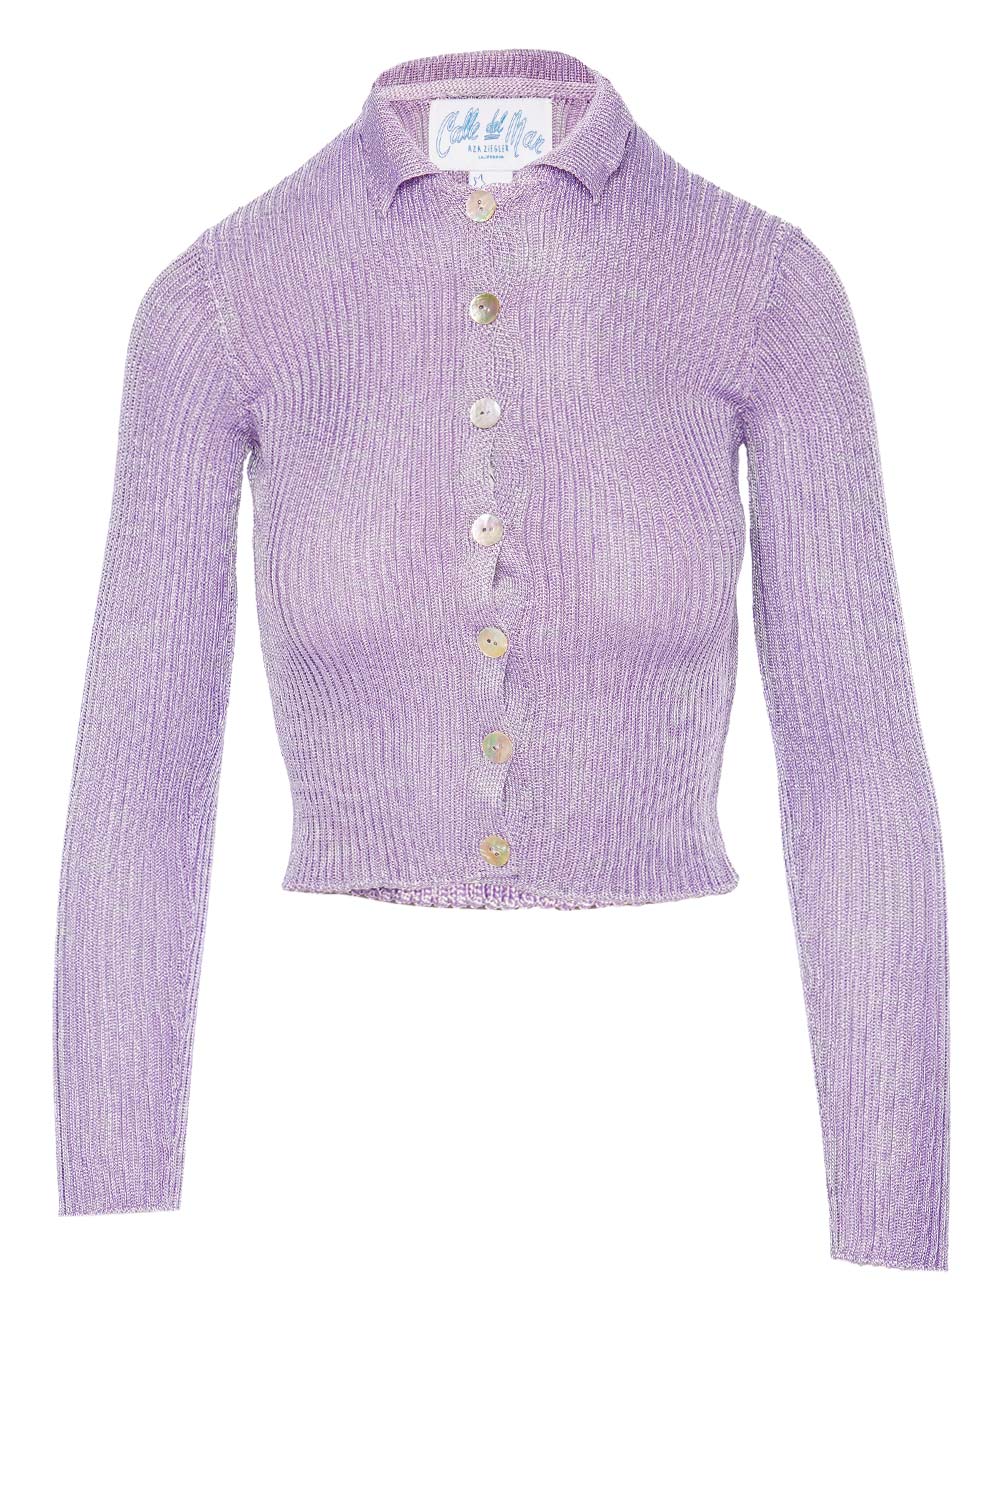 Calle Del Mar Lilac Ribbed Long Sleeve Cardigan